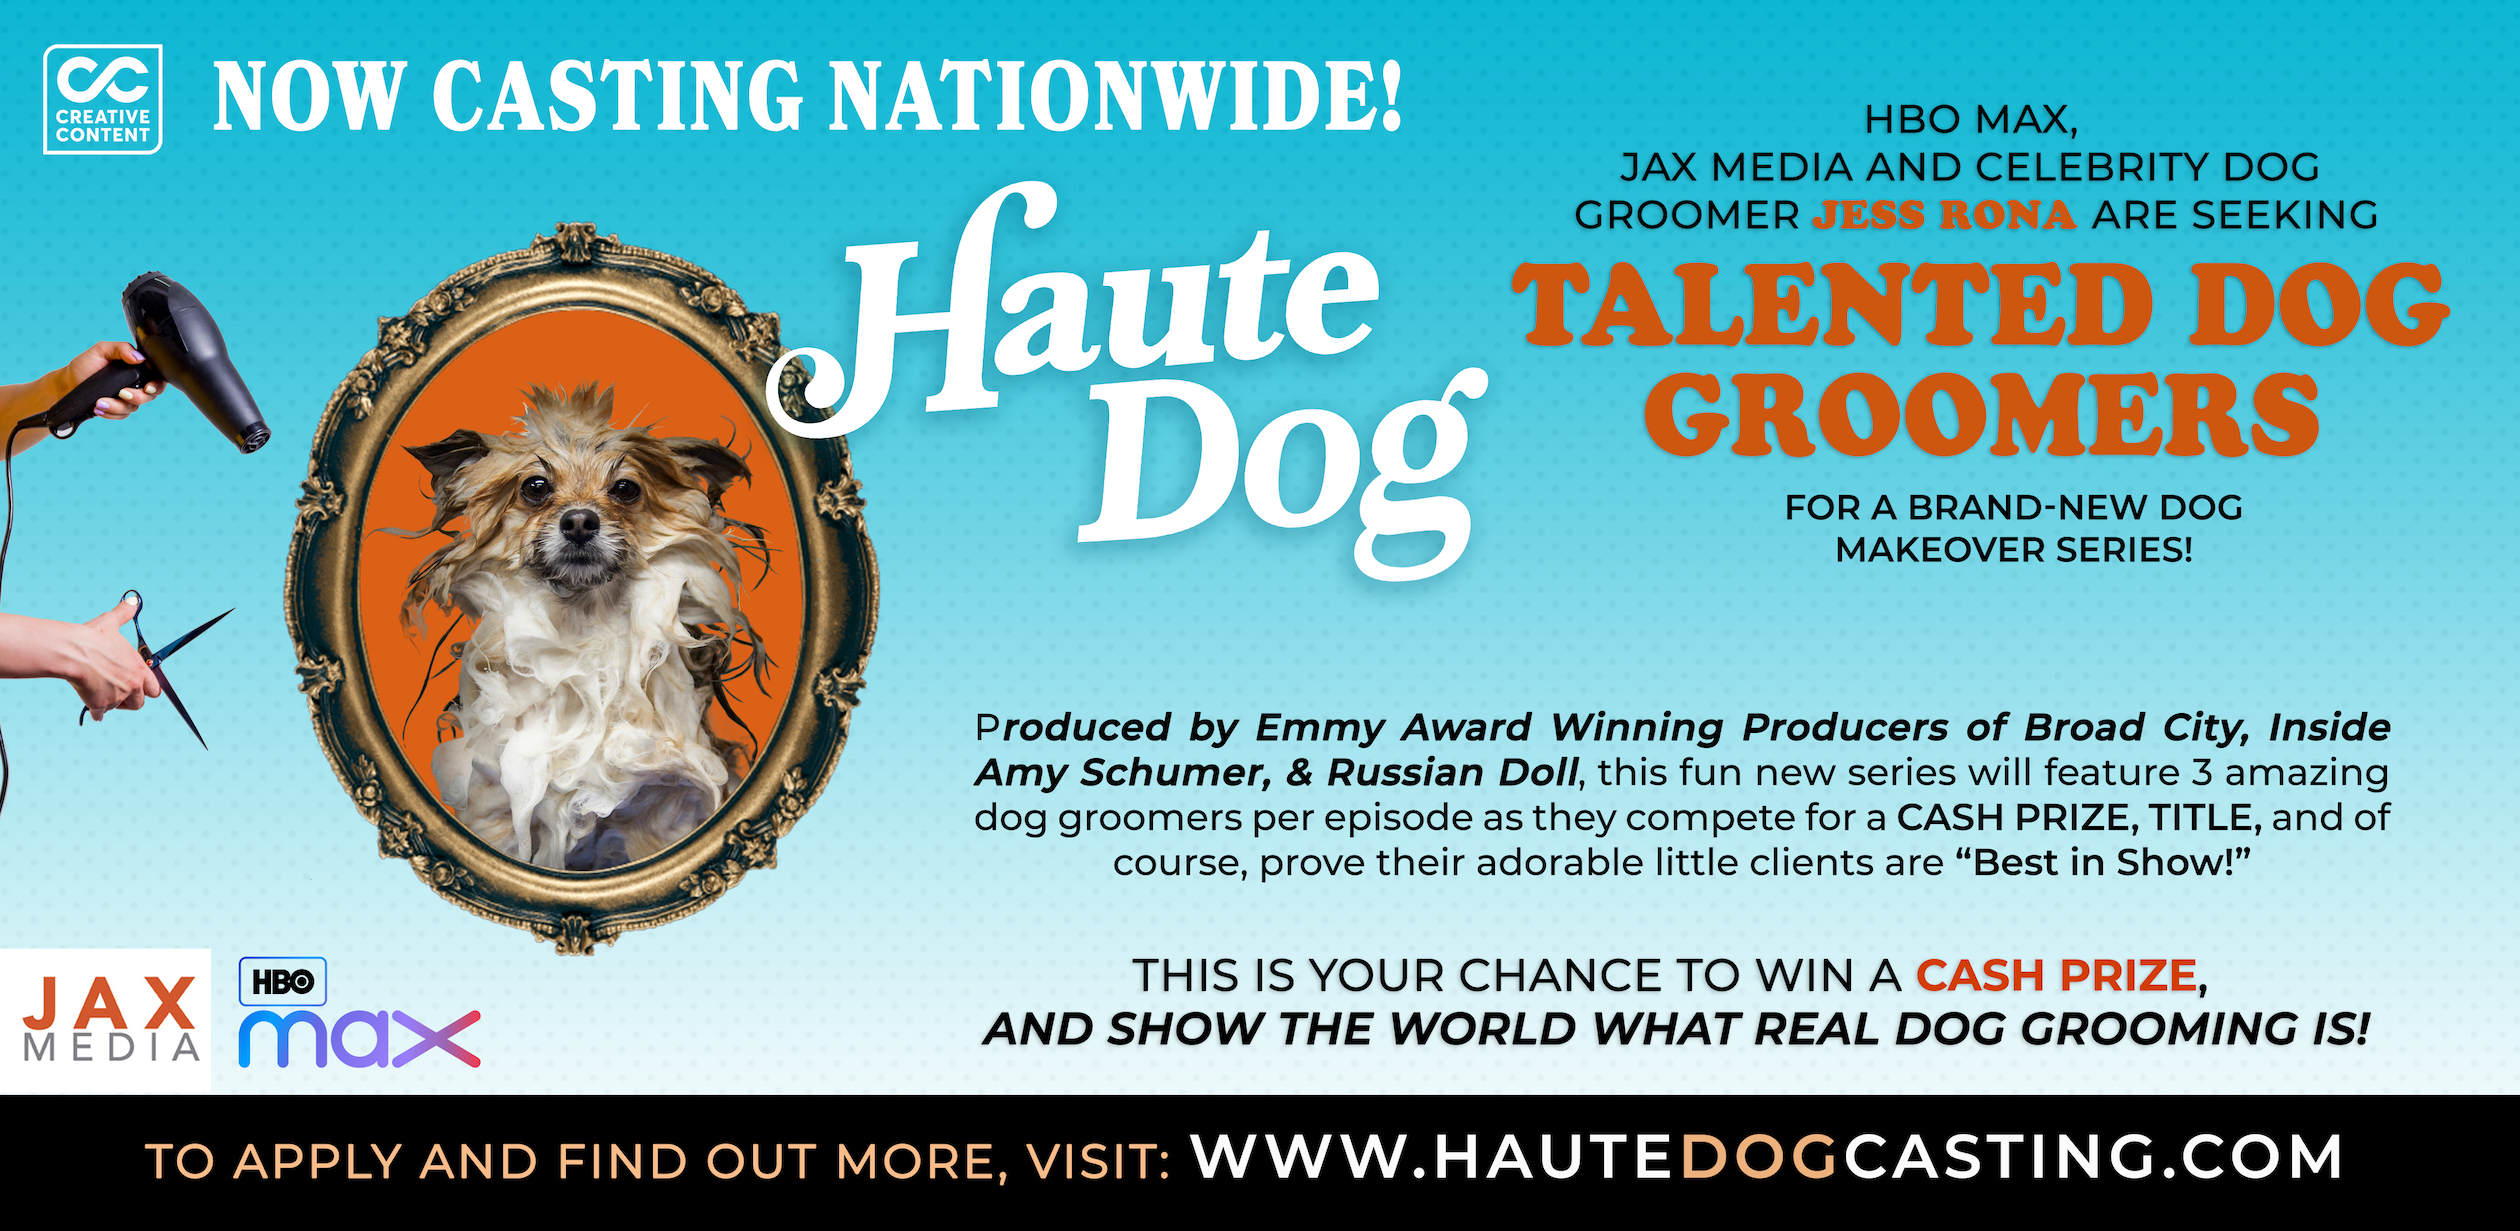 HBO Max's Haute Dog is now casting! | Creative Content Group